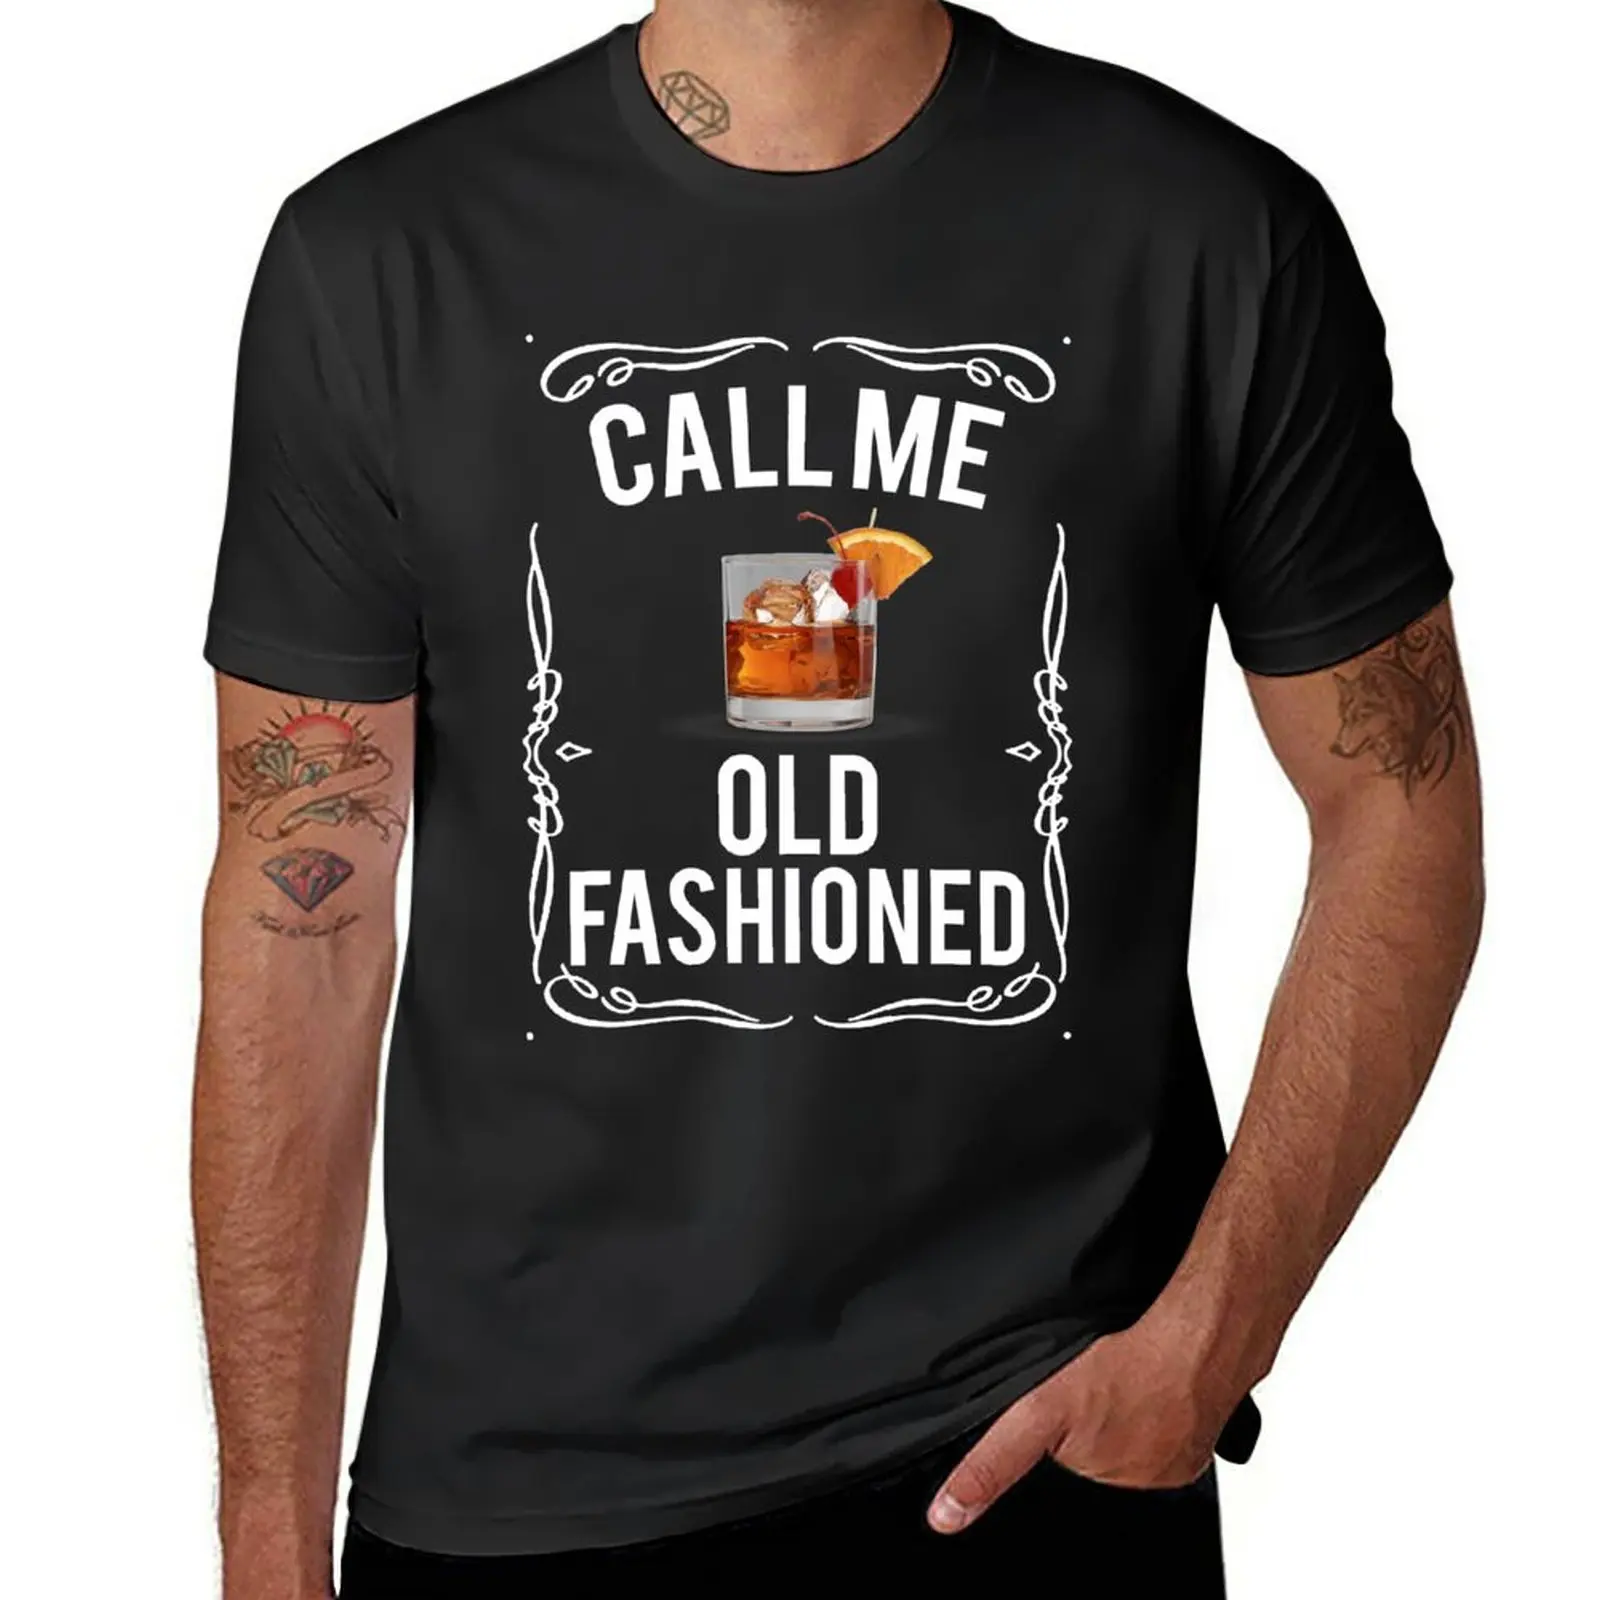 

New FUNNY WHISKEY BOURBON BRANDY CALL ME OLD FASHIONED product T-Shirt shirts graphic tees plain black t shirts men